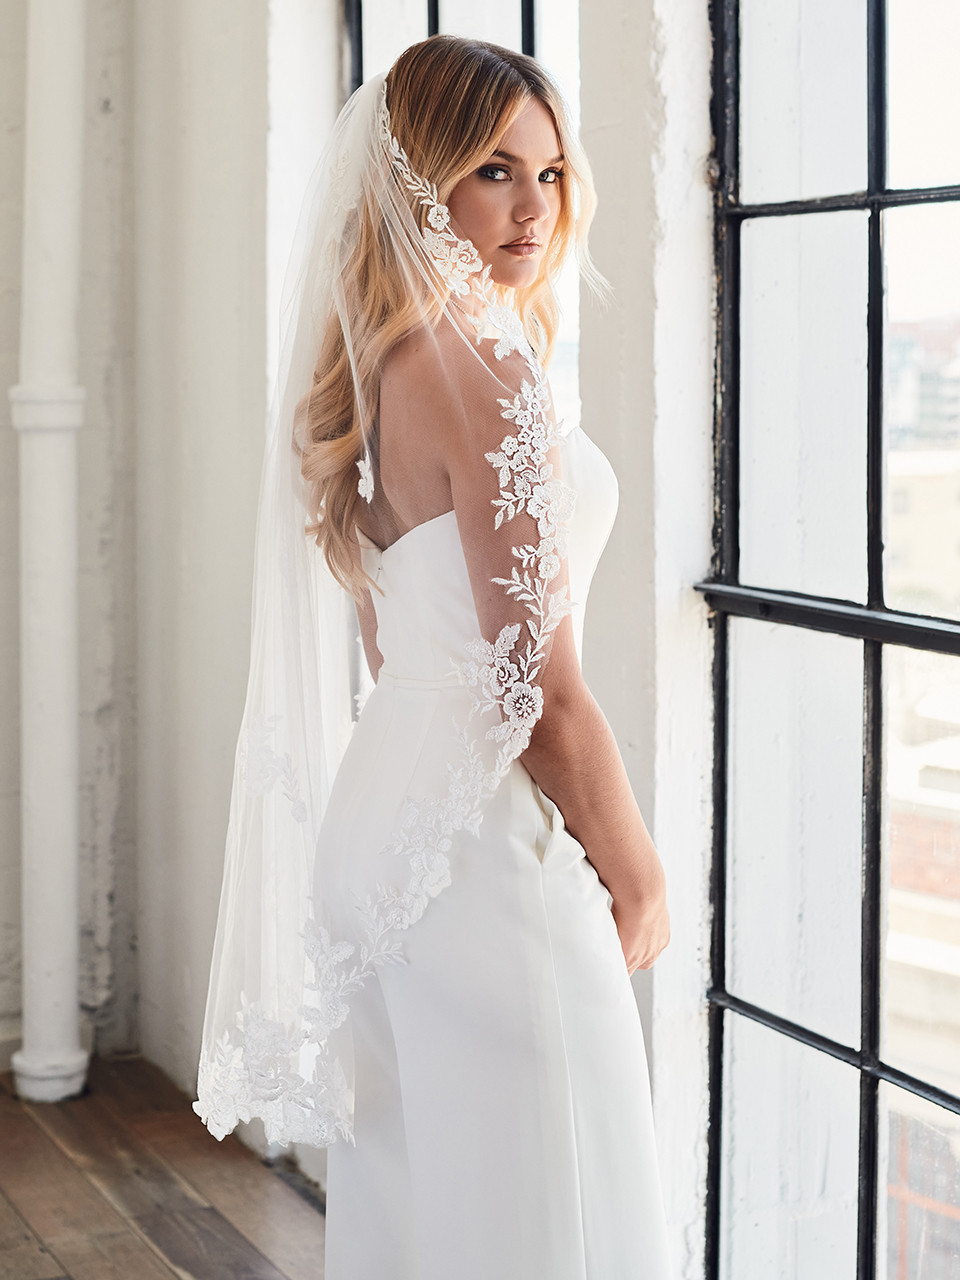  En Vogue Bridal Veil V2398SF - English tulle veil with floral lace edging and scattered appliques - 41"L